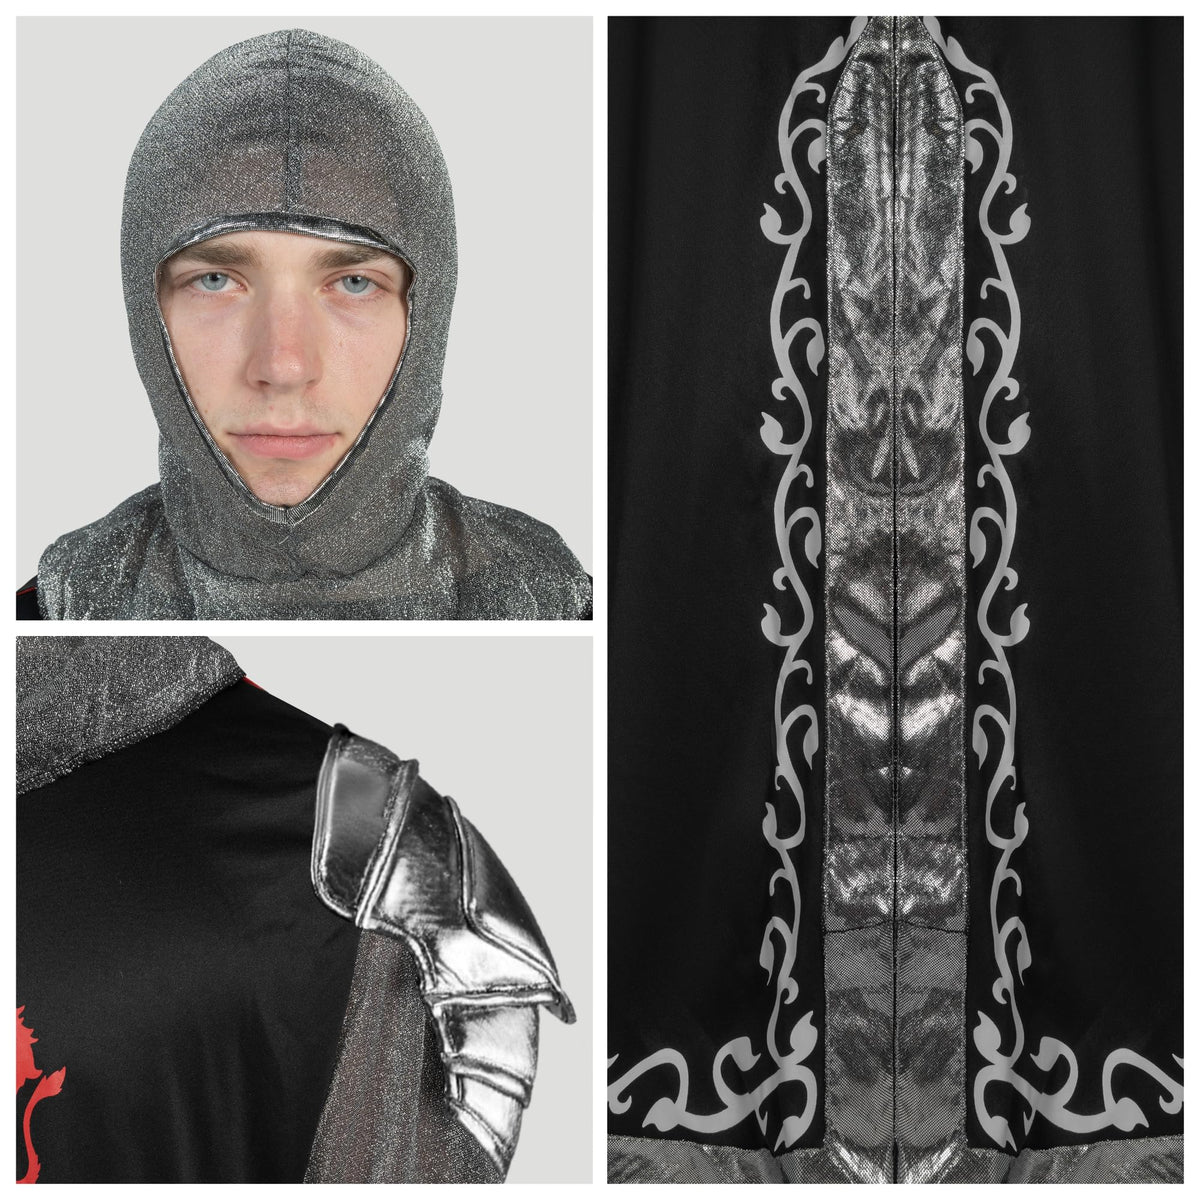 Black Men's Medieval Knight Costume with Armor Cape Tunic Hood ...